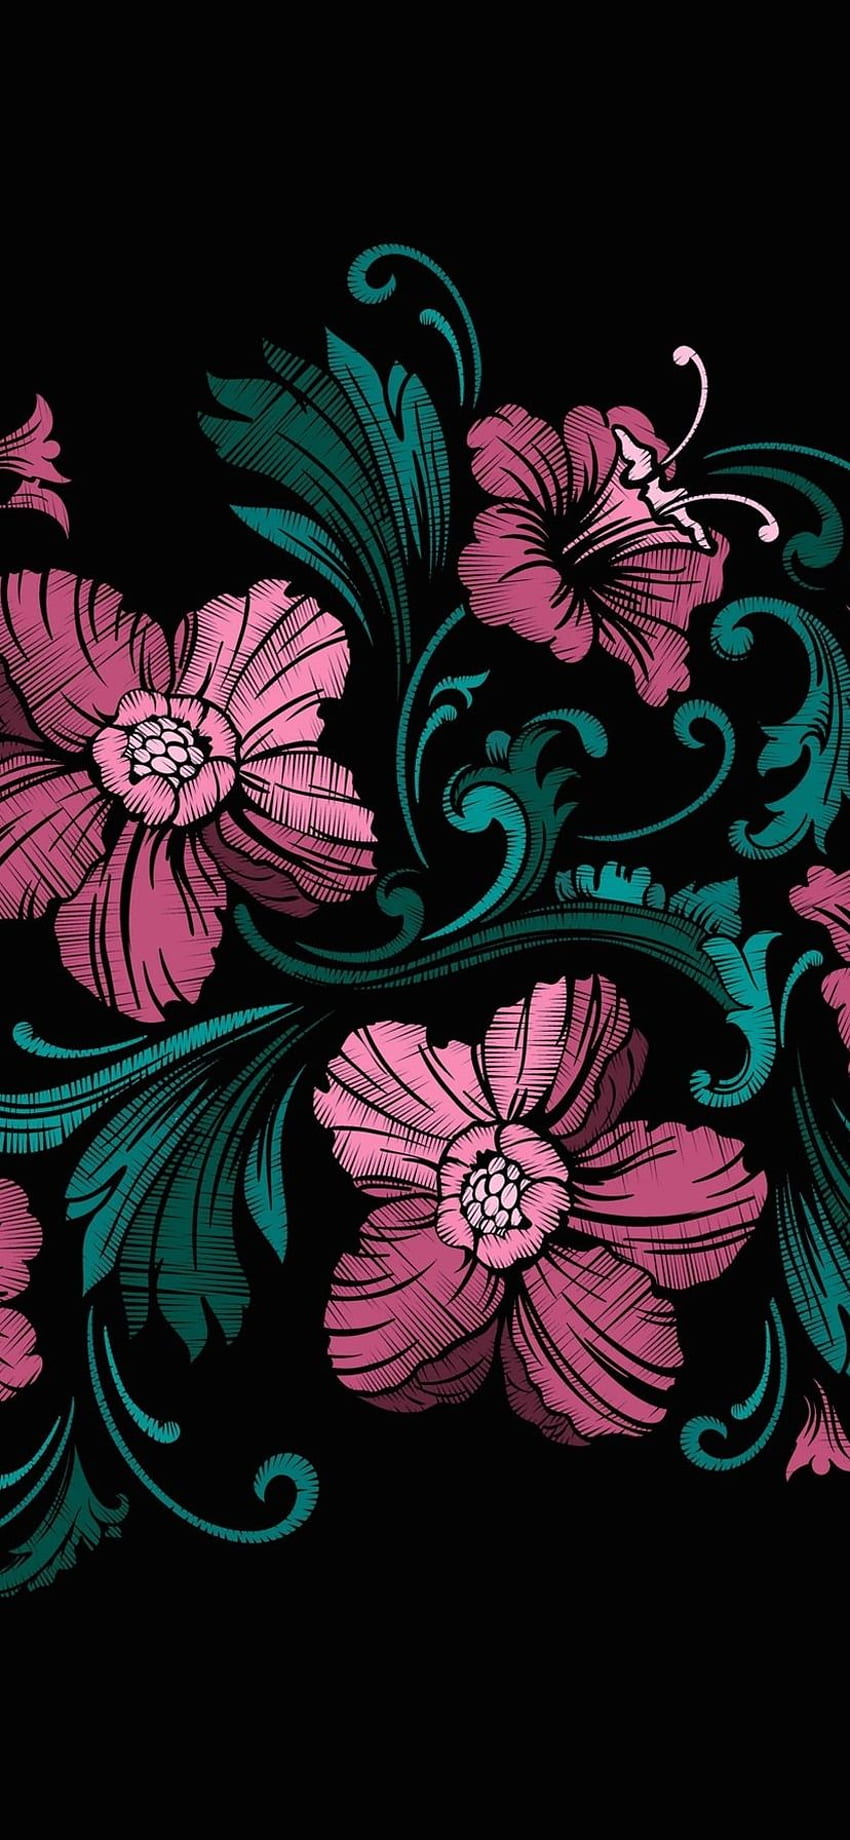 Embroidery Seamless Pattern Texture Wallpaper Background With Beautiful Pink  Roses Vector Floral Ornament On Black Background Template For Printing  Textiles Design Stock Illustration  Download Image Now  iStock